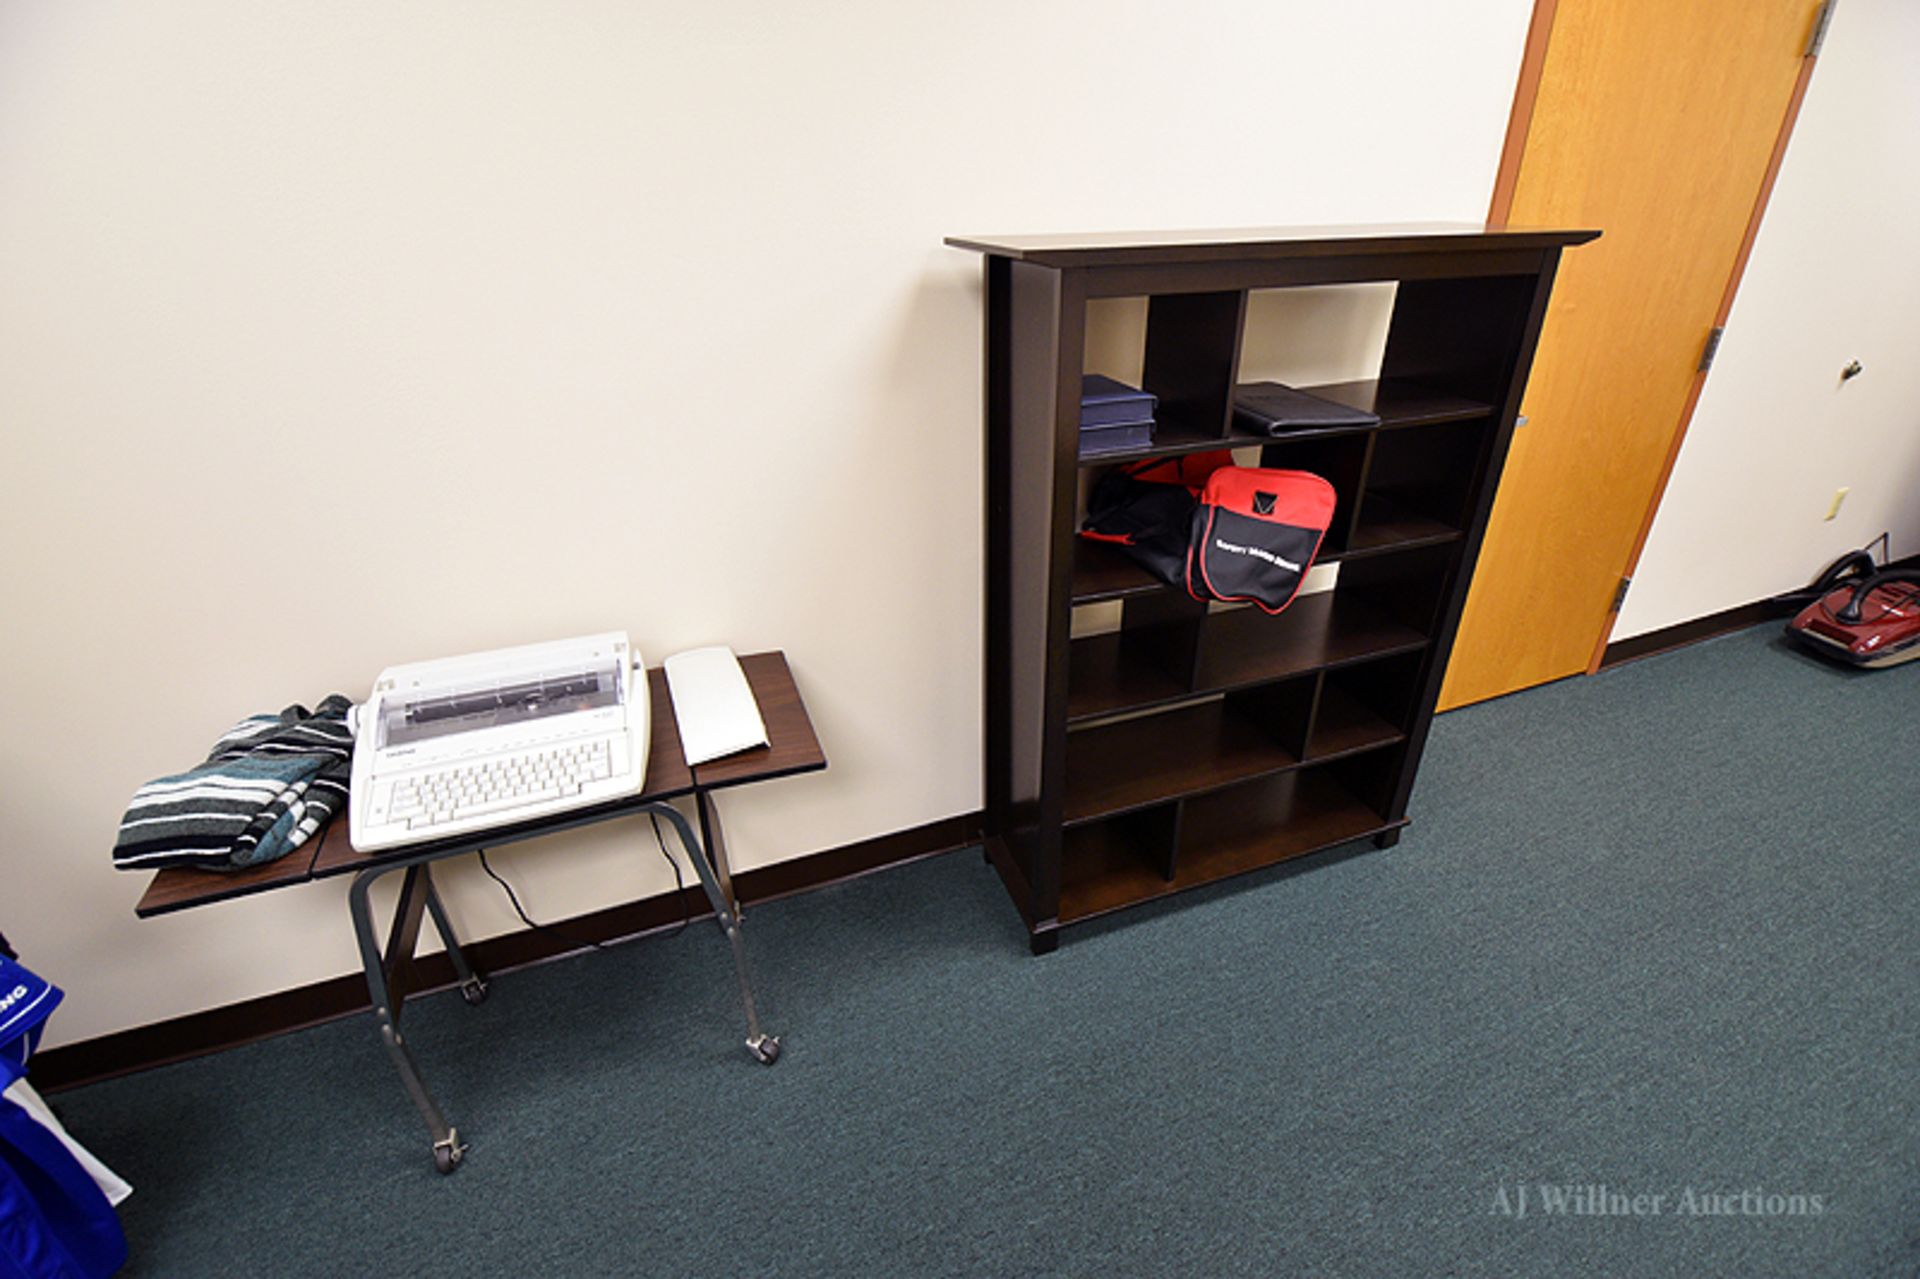 Ass't Office Furniture & Equipment - Image 3 of 3